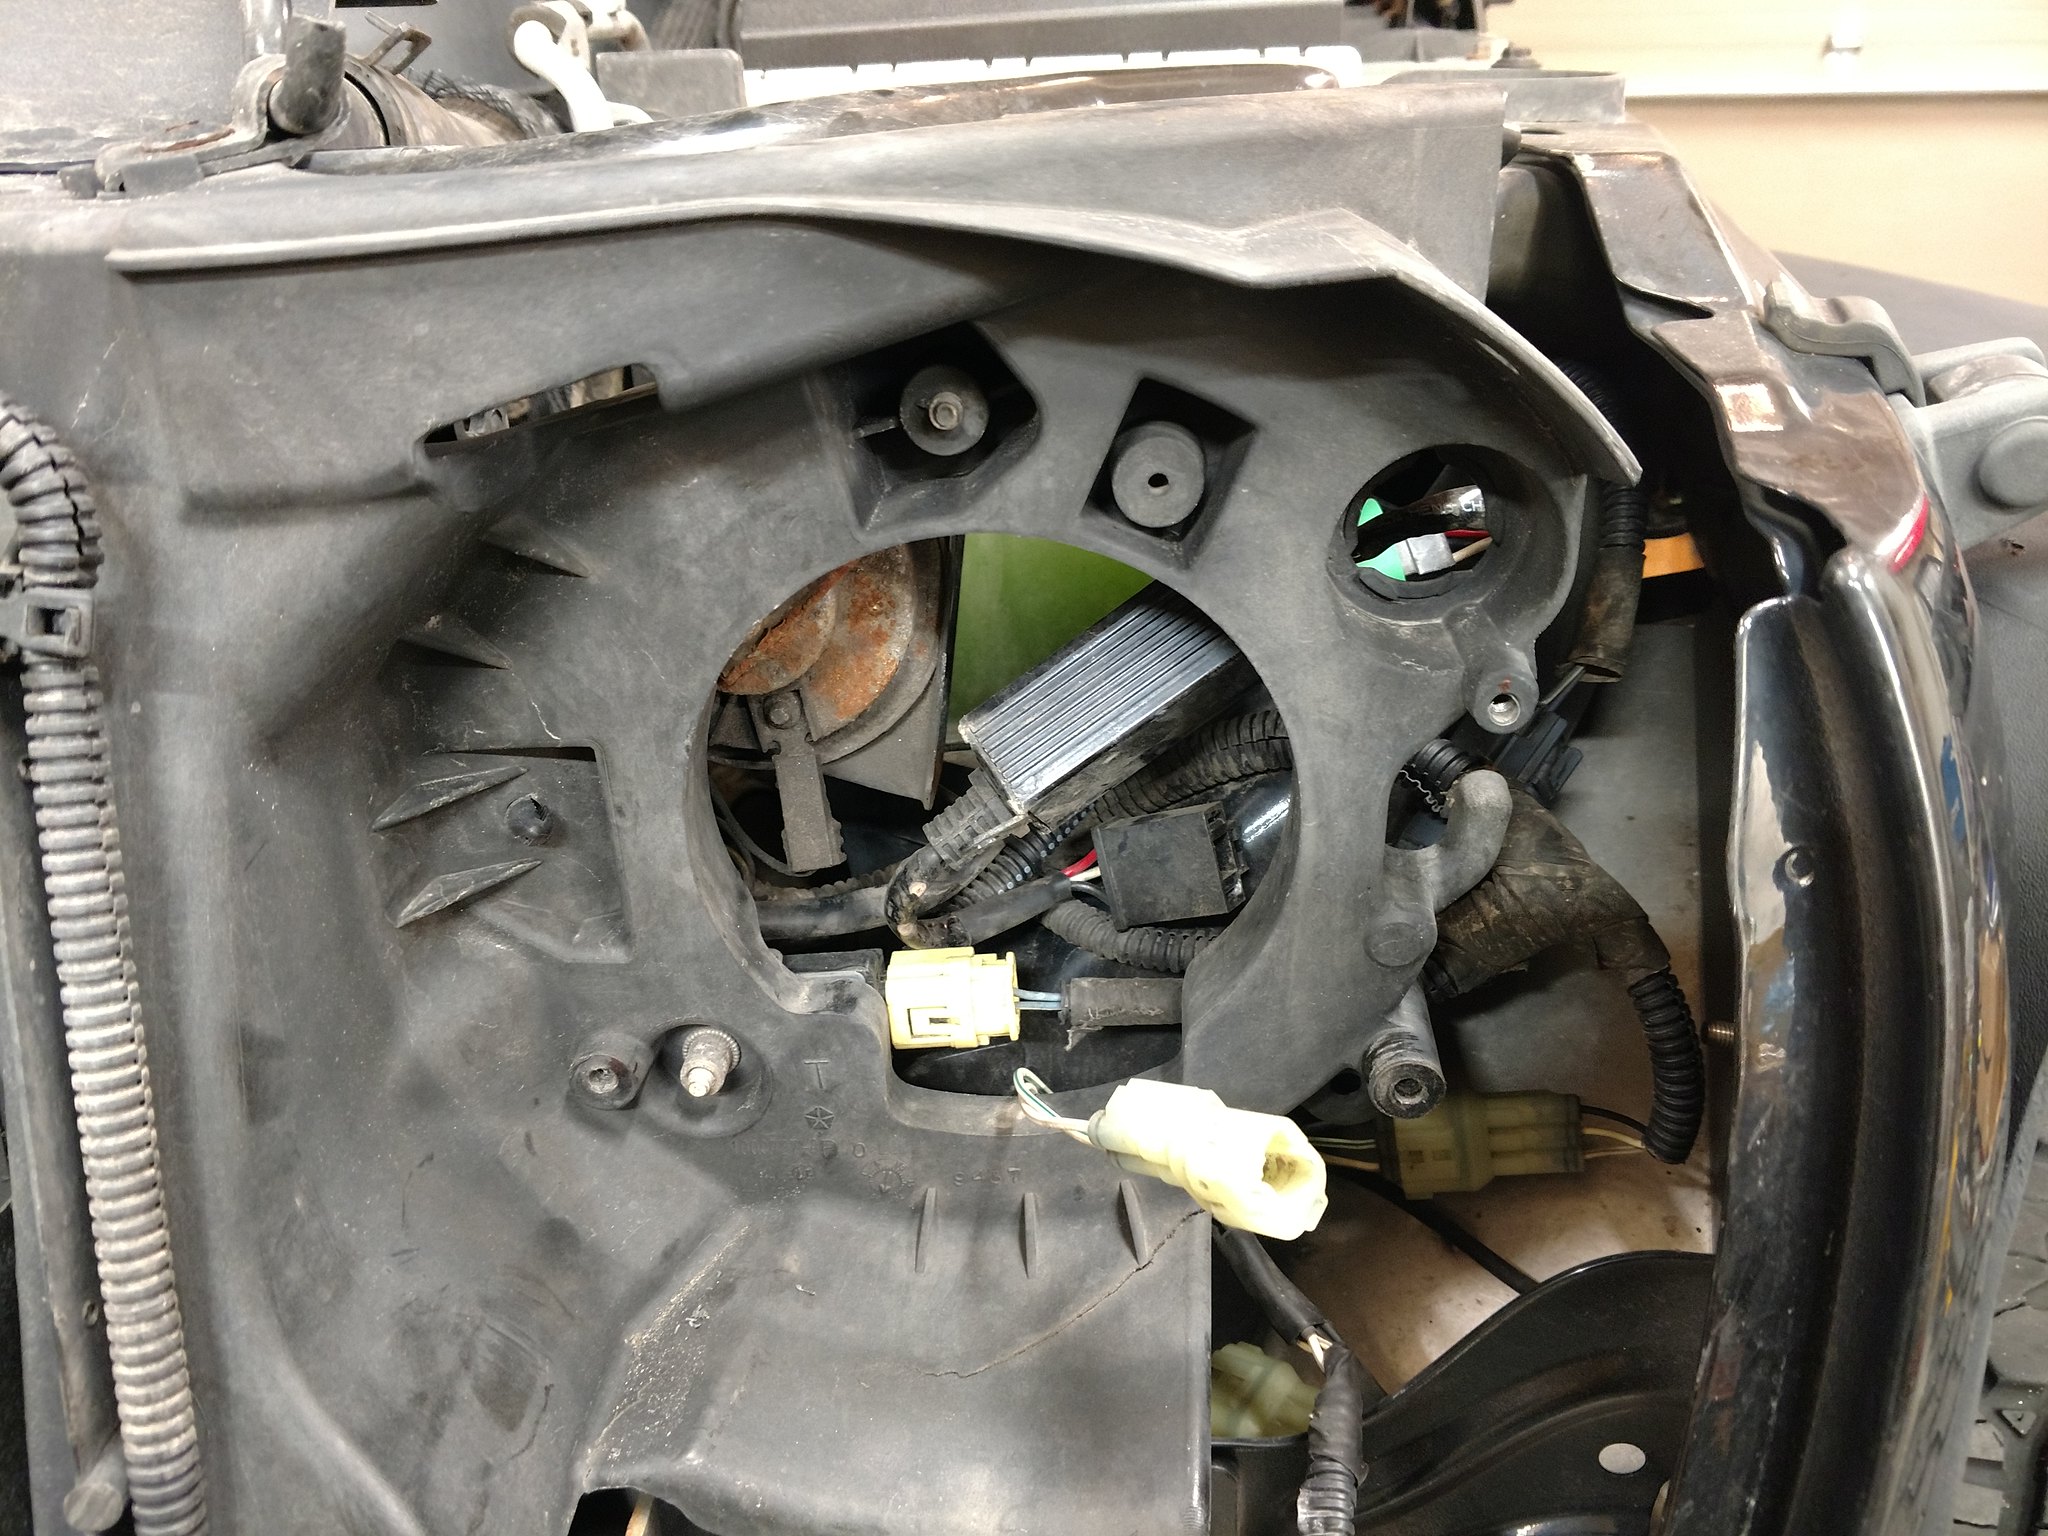 clutch adjustment  - The top destination for Jeep JK and JL  Wrangler news, rumors, and discussion